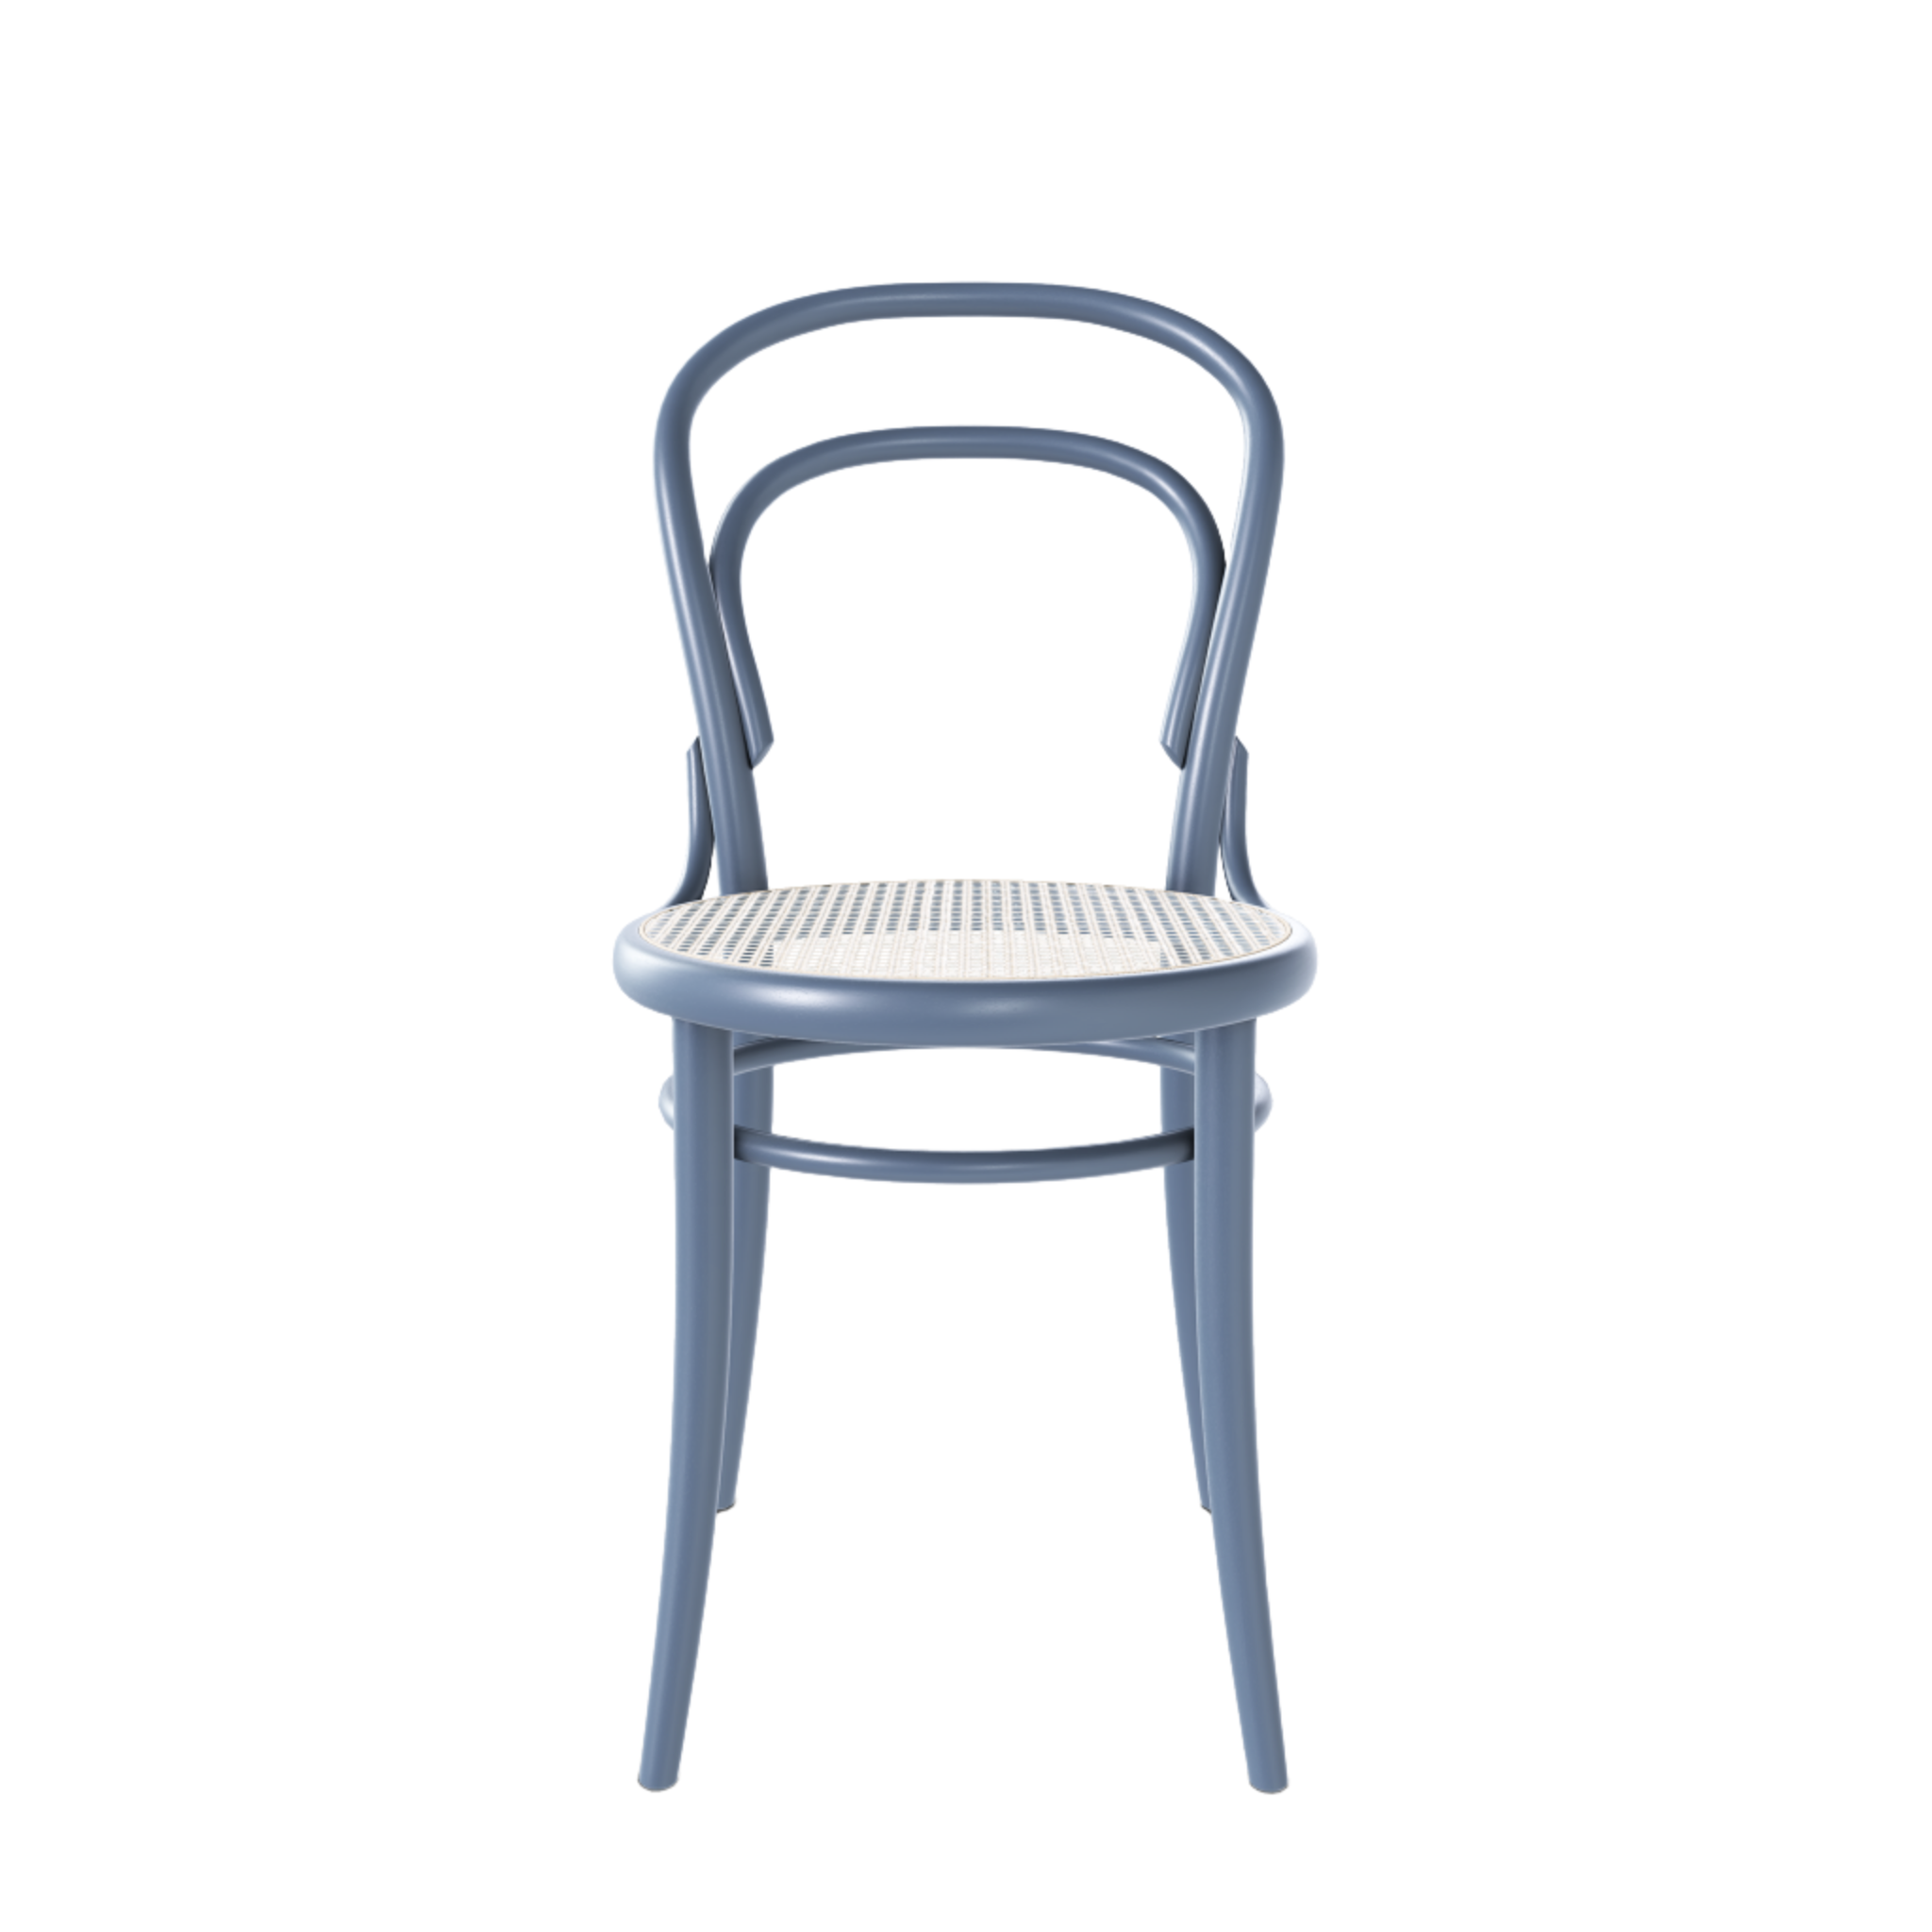 Ton 14 Dining Chair with cane seat in steam blue